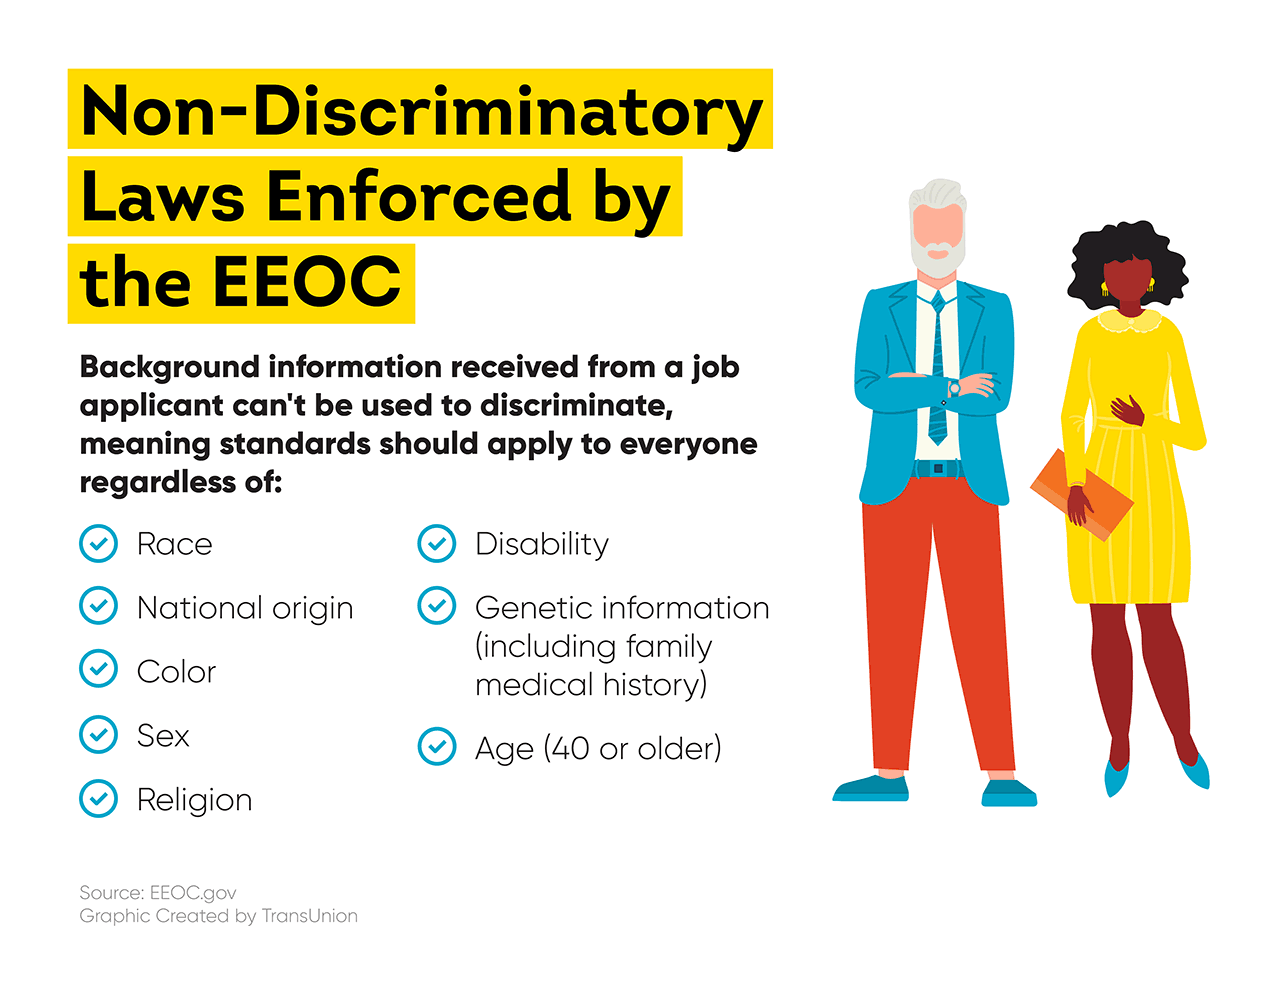 Non-Discriminatory Laws Enforced by the EEOC